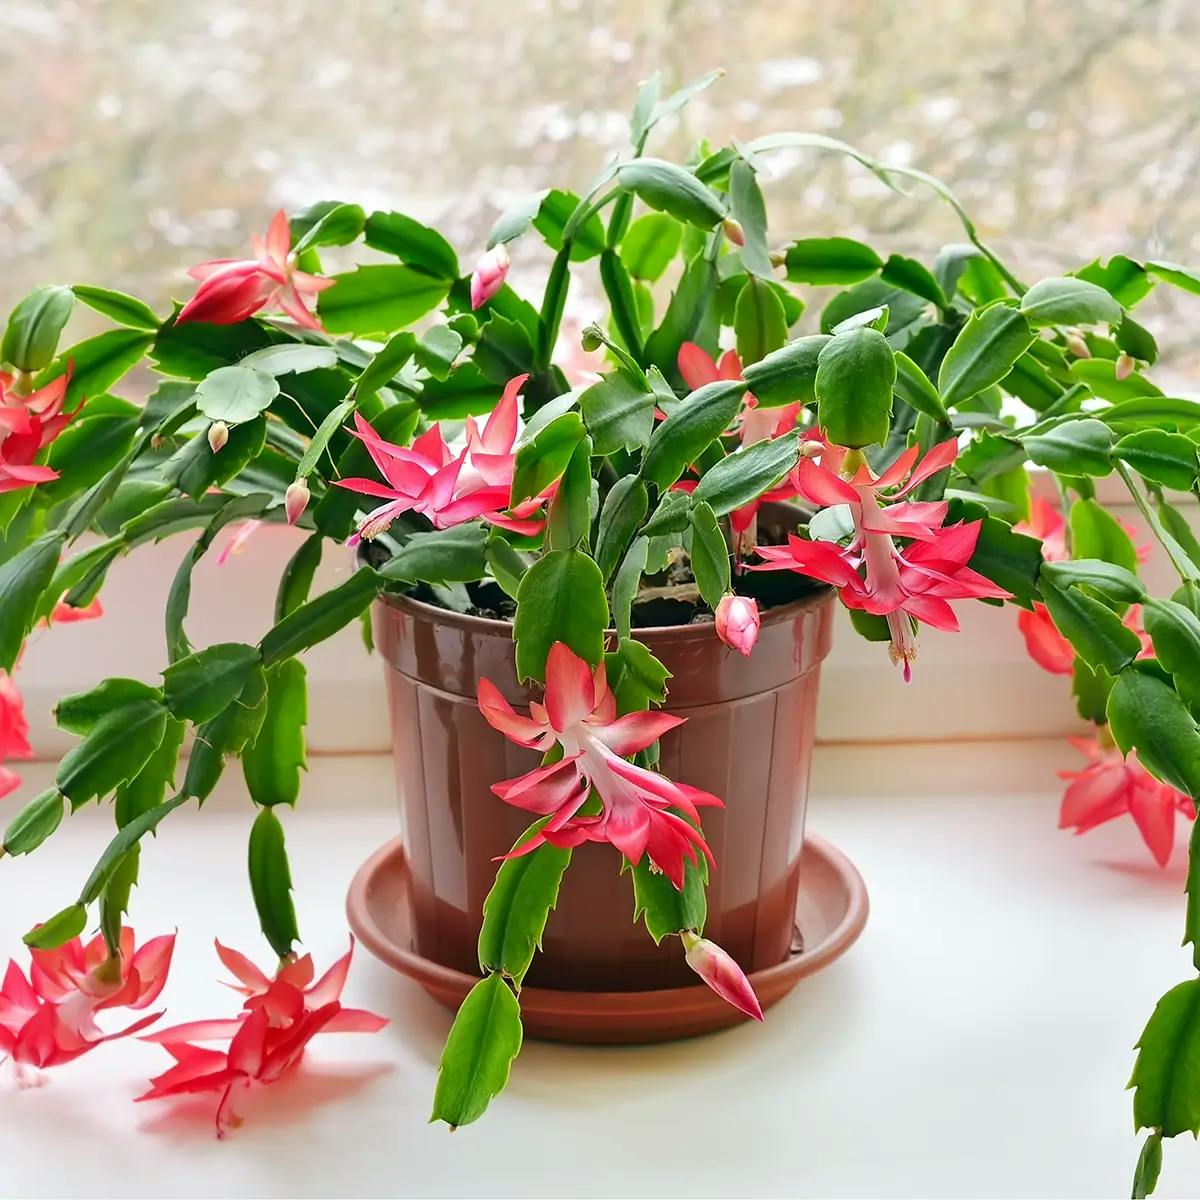 A mature Christmas cactus with red blooms in a clay-colored pot on a white surface in front of a window.